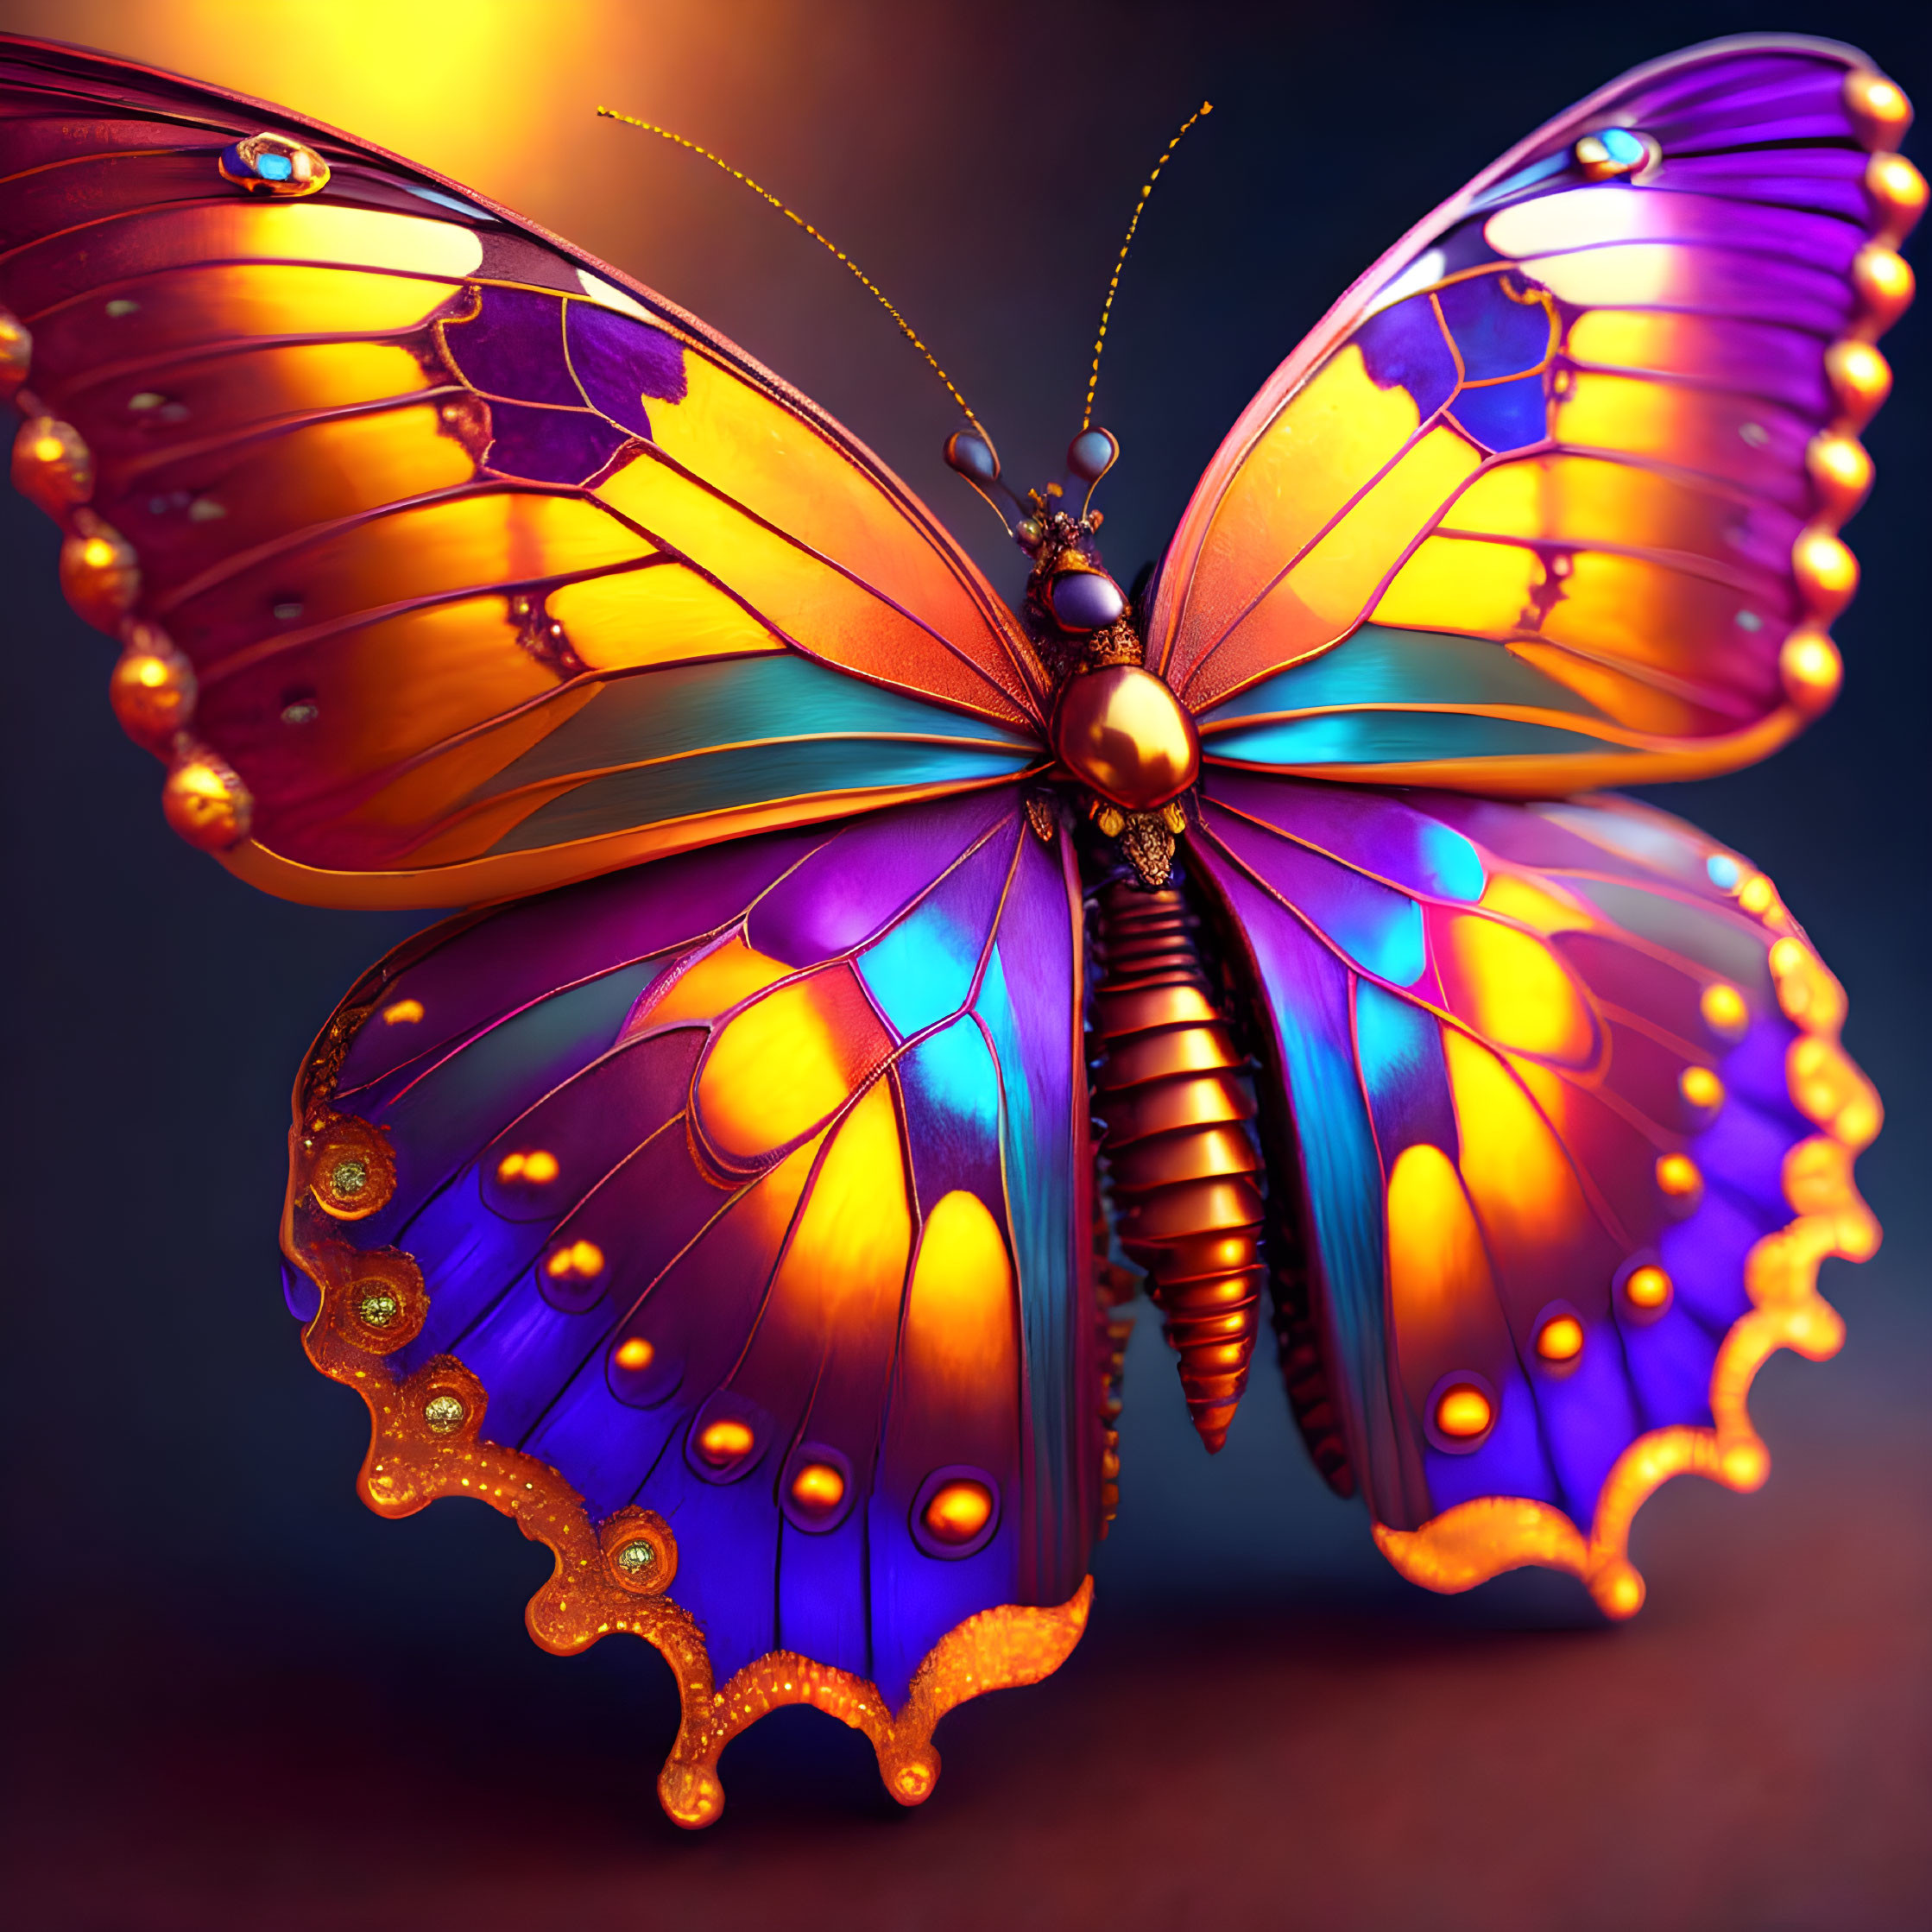 Colorful Butterfly Artwork with Purple and Orange Wings on Gradient Background